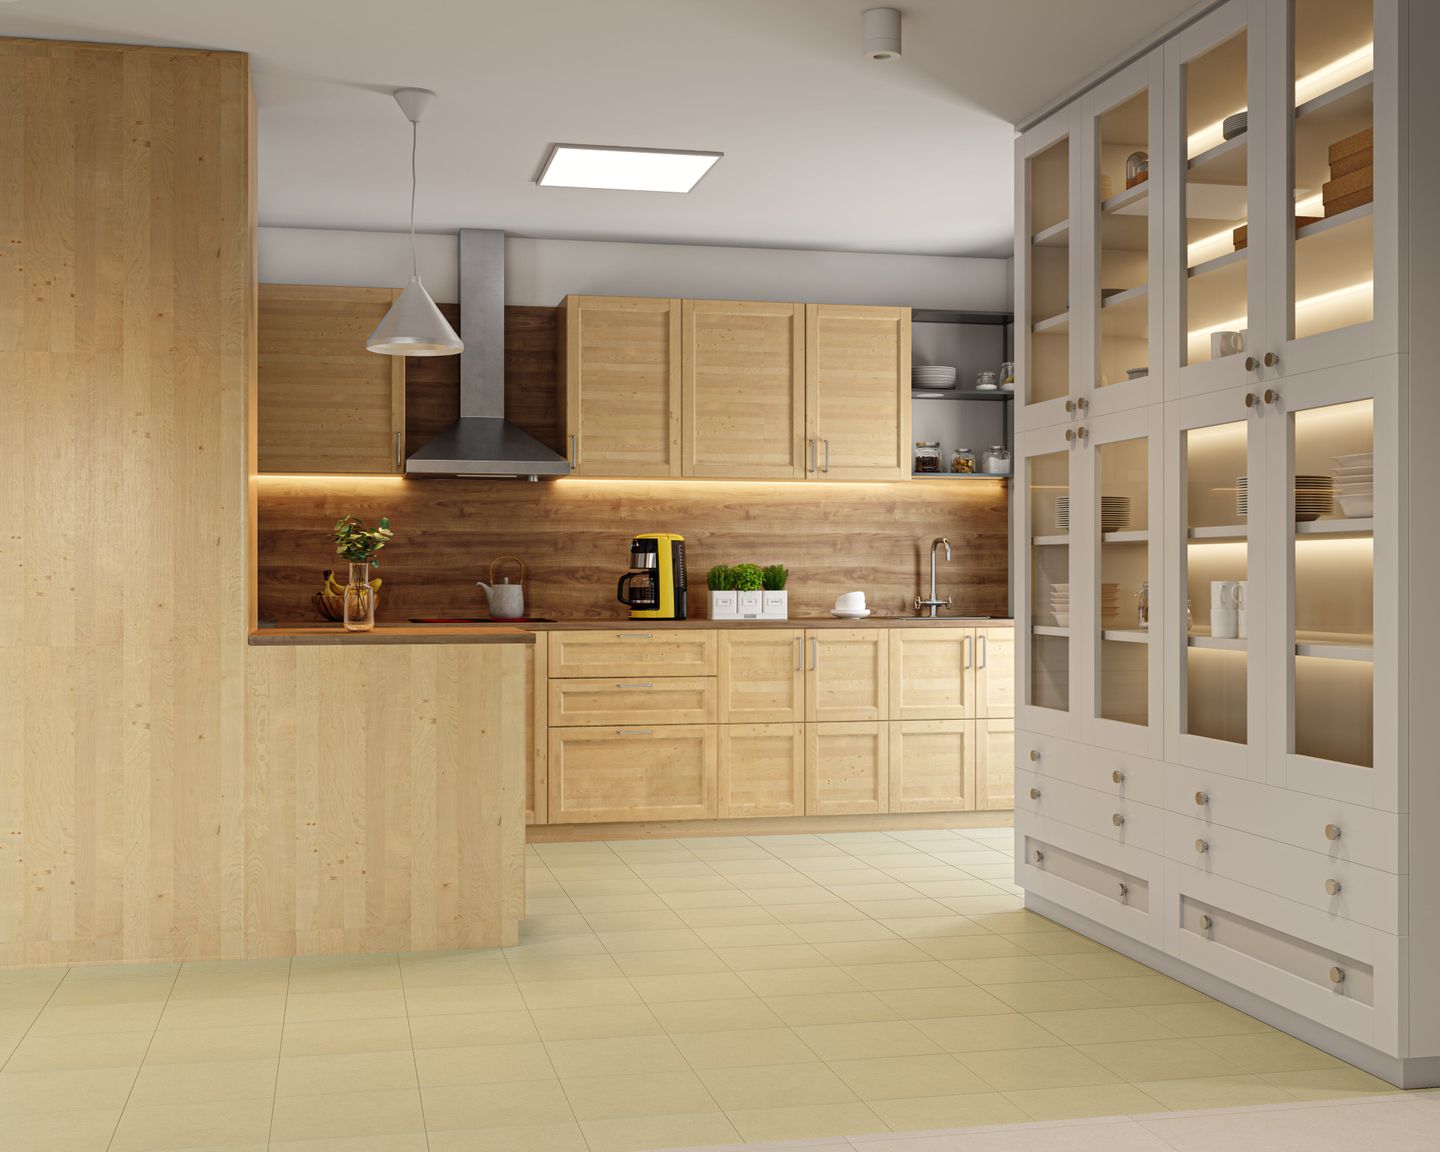 Classic Parallel Kitchen Design With Wooden Counter Top